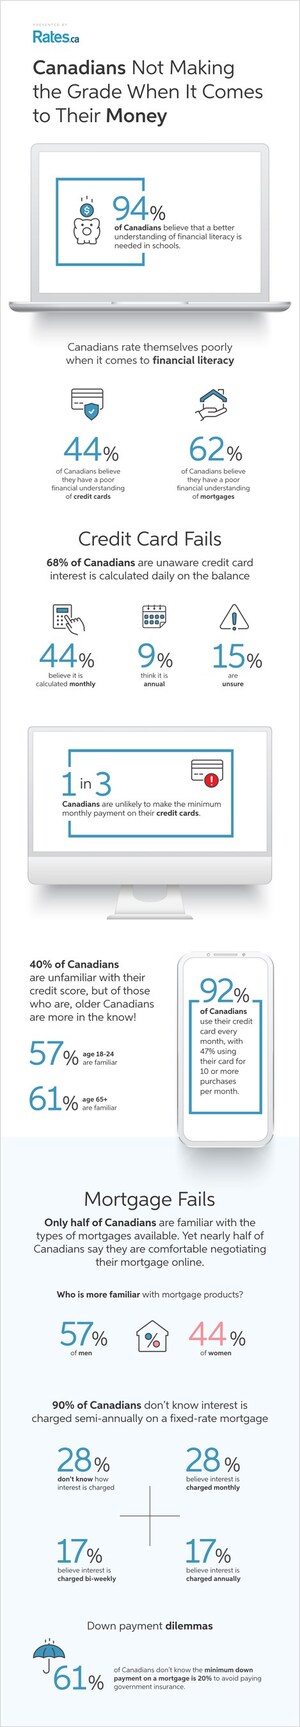 Many Canadians grade themselves "C" or worse when it comes to money matters: national survey from Rates.ca